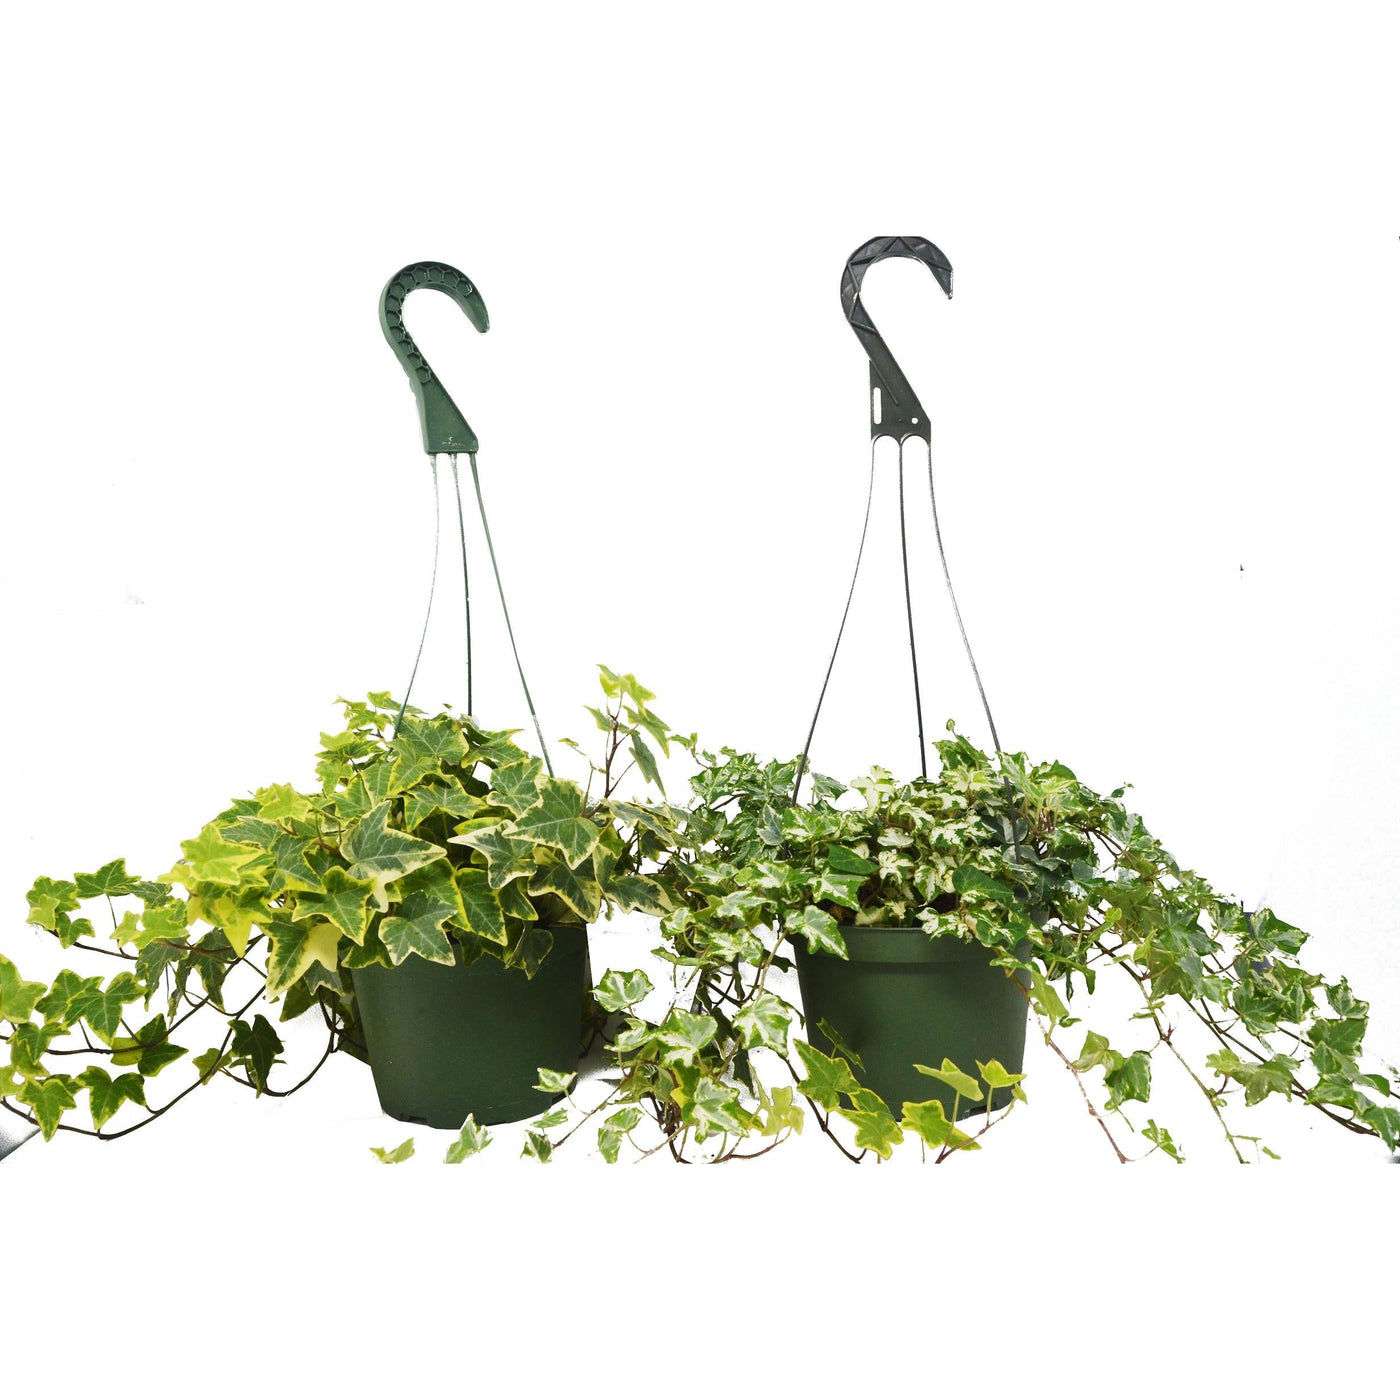 2 English Ivy Variety Pack - FREE Care Guide - 6" Hanging Pot by House Plant Dropship